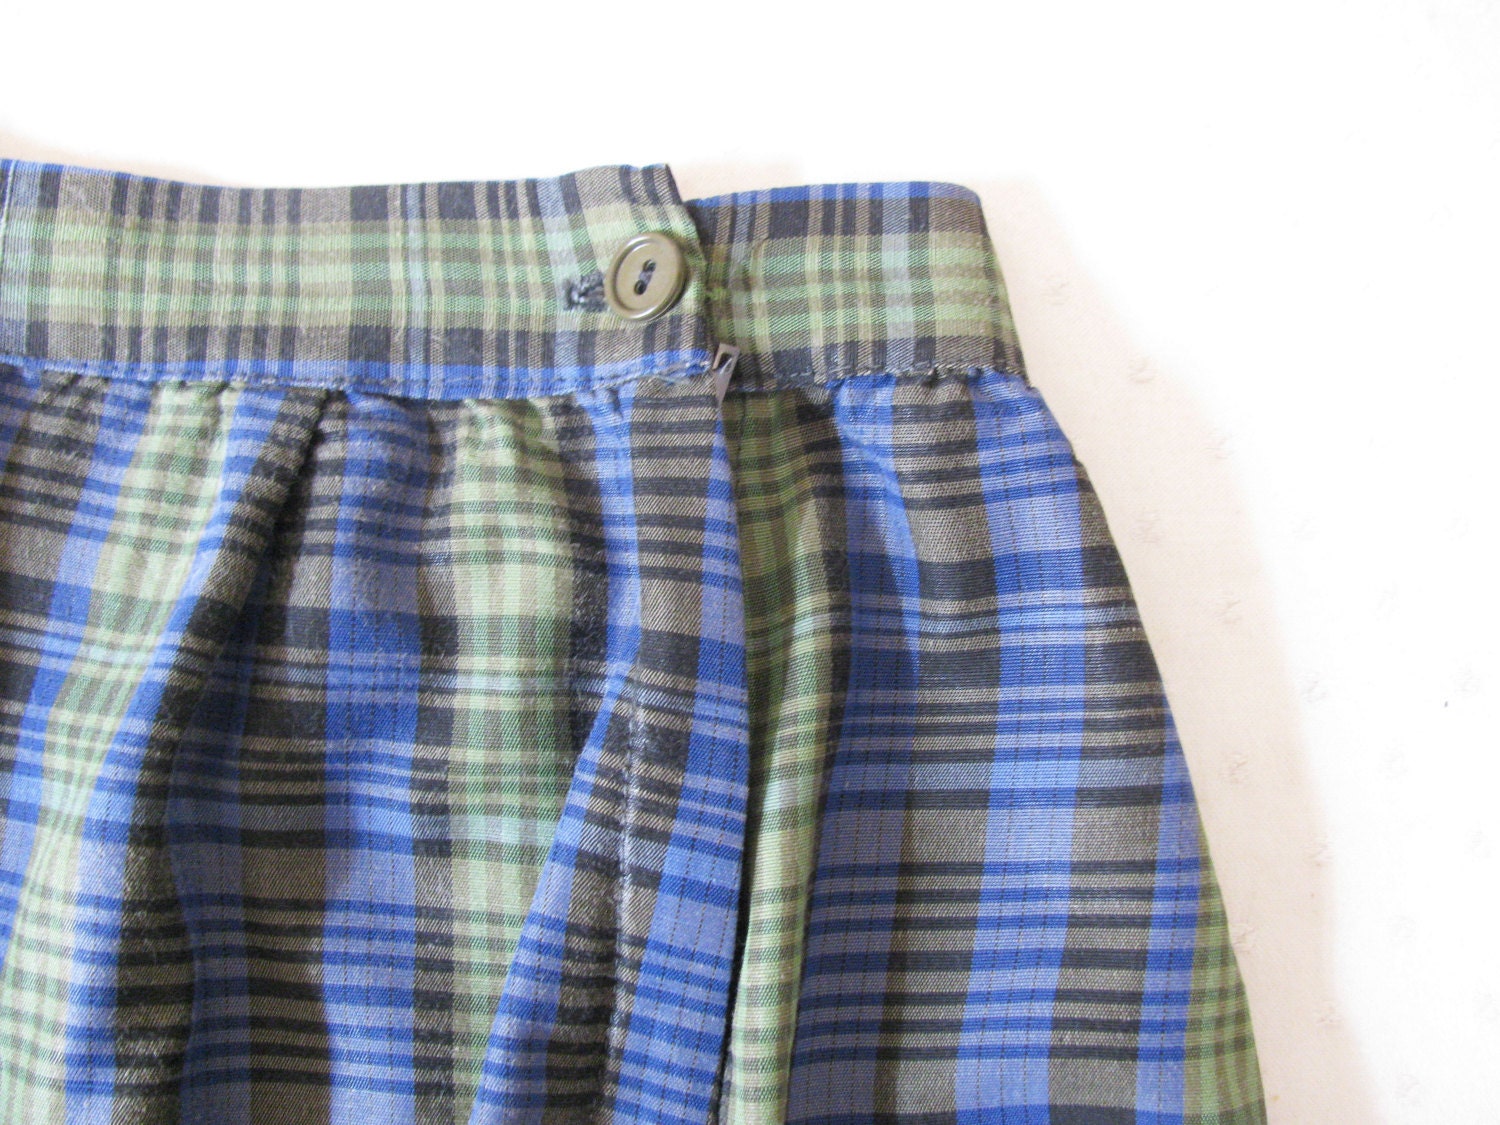 Vintage High-waisted Green and Blue Plaid Pinup Walking Shorts - Etsy